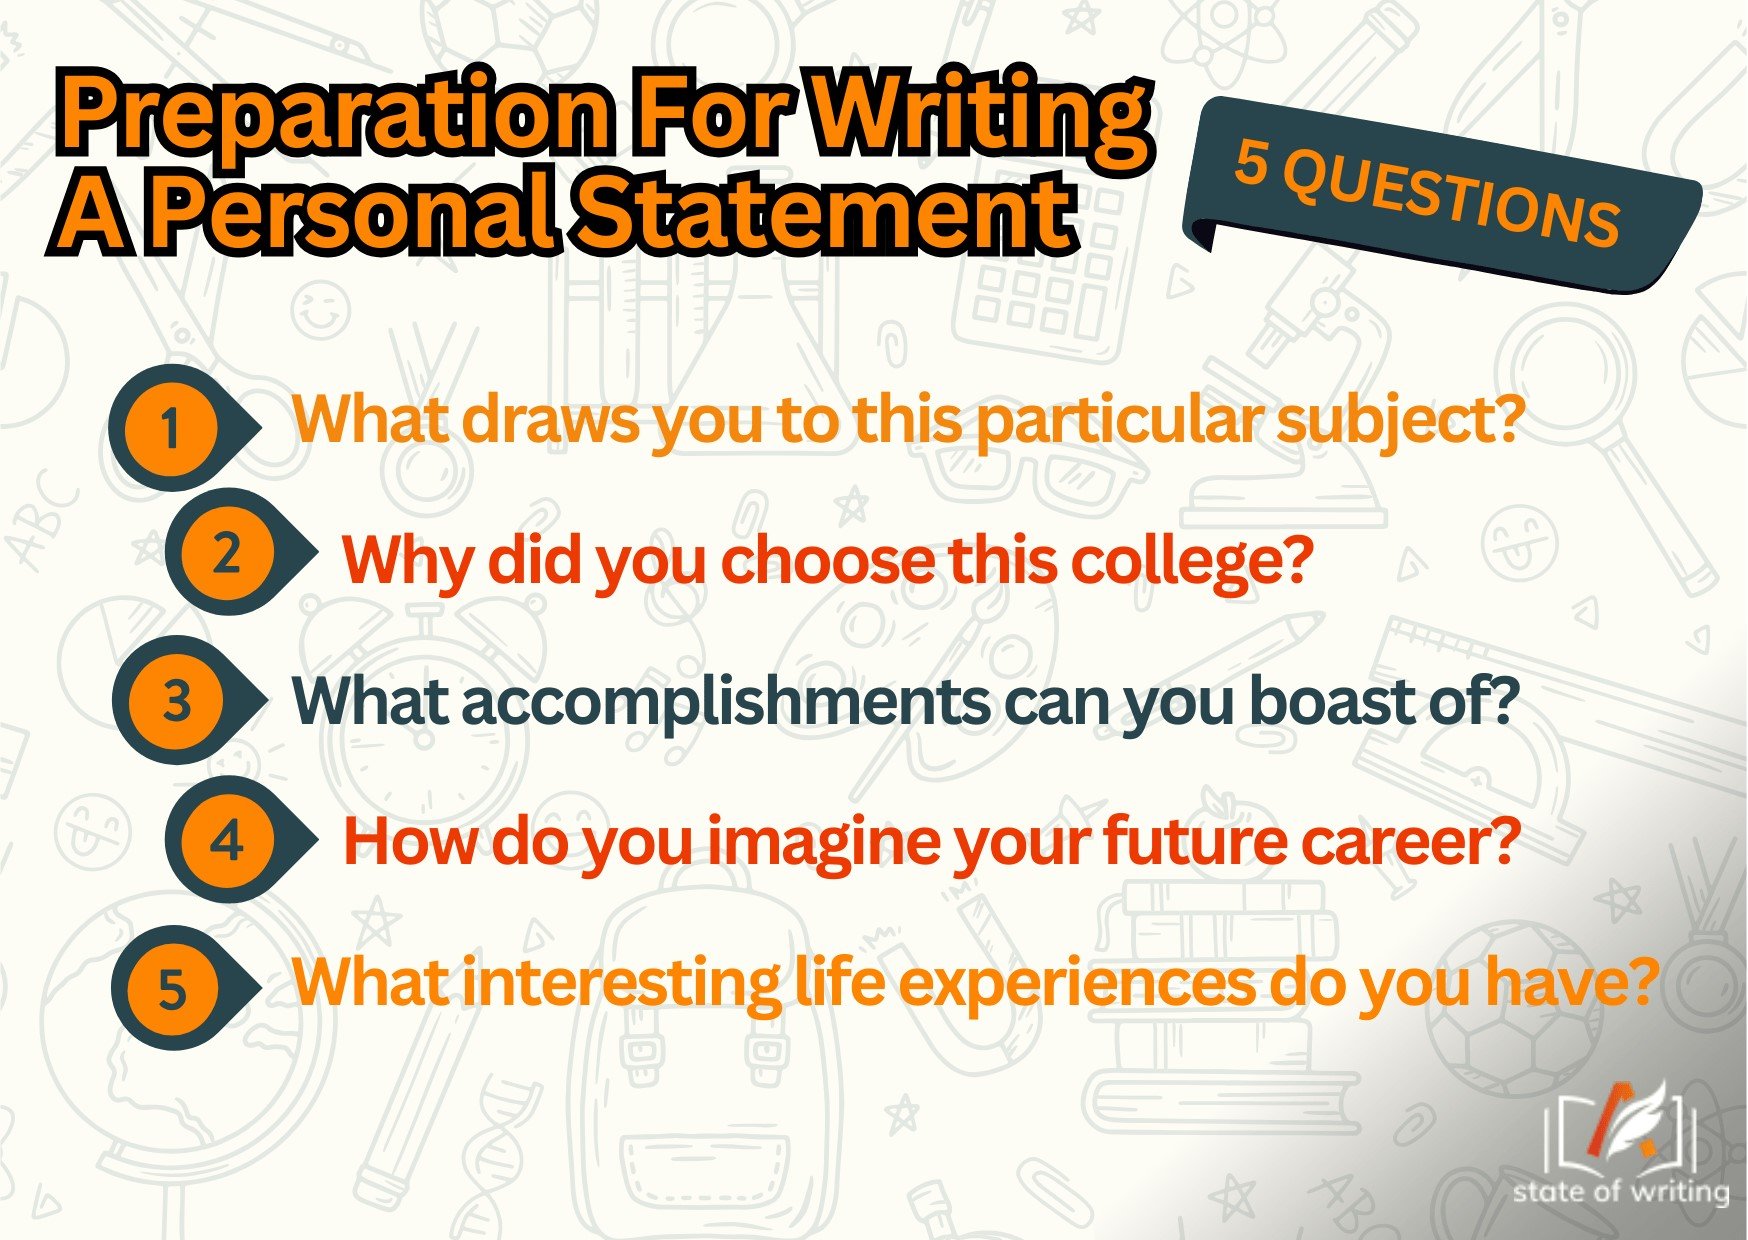 Questions before writing a personal statement